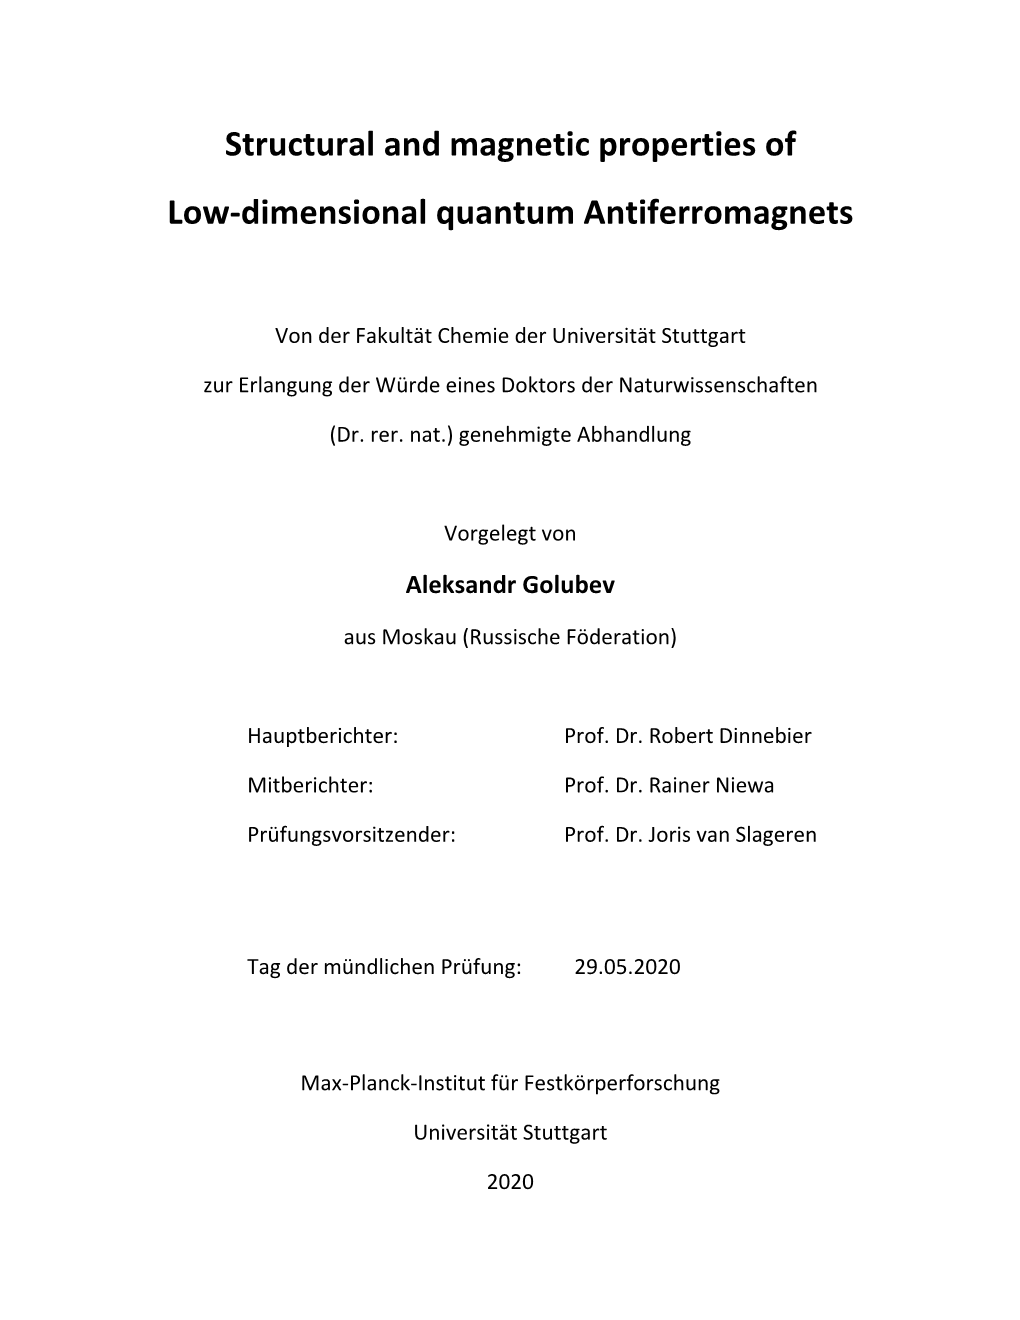 Structural and Magnetic Properties of Low-Dimensional Quantum Antiferromagnets